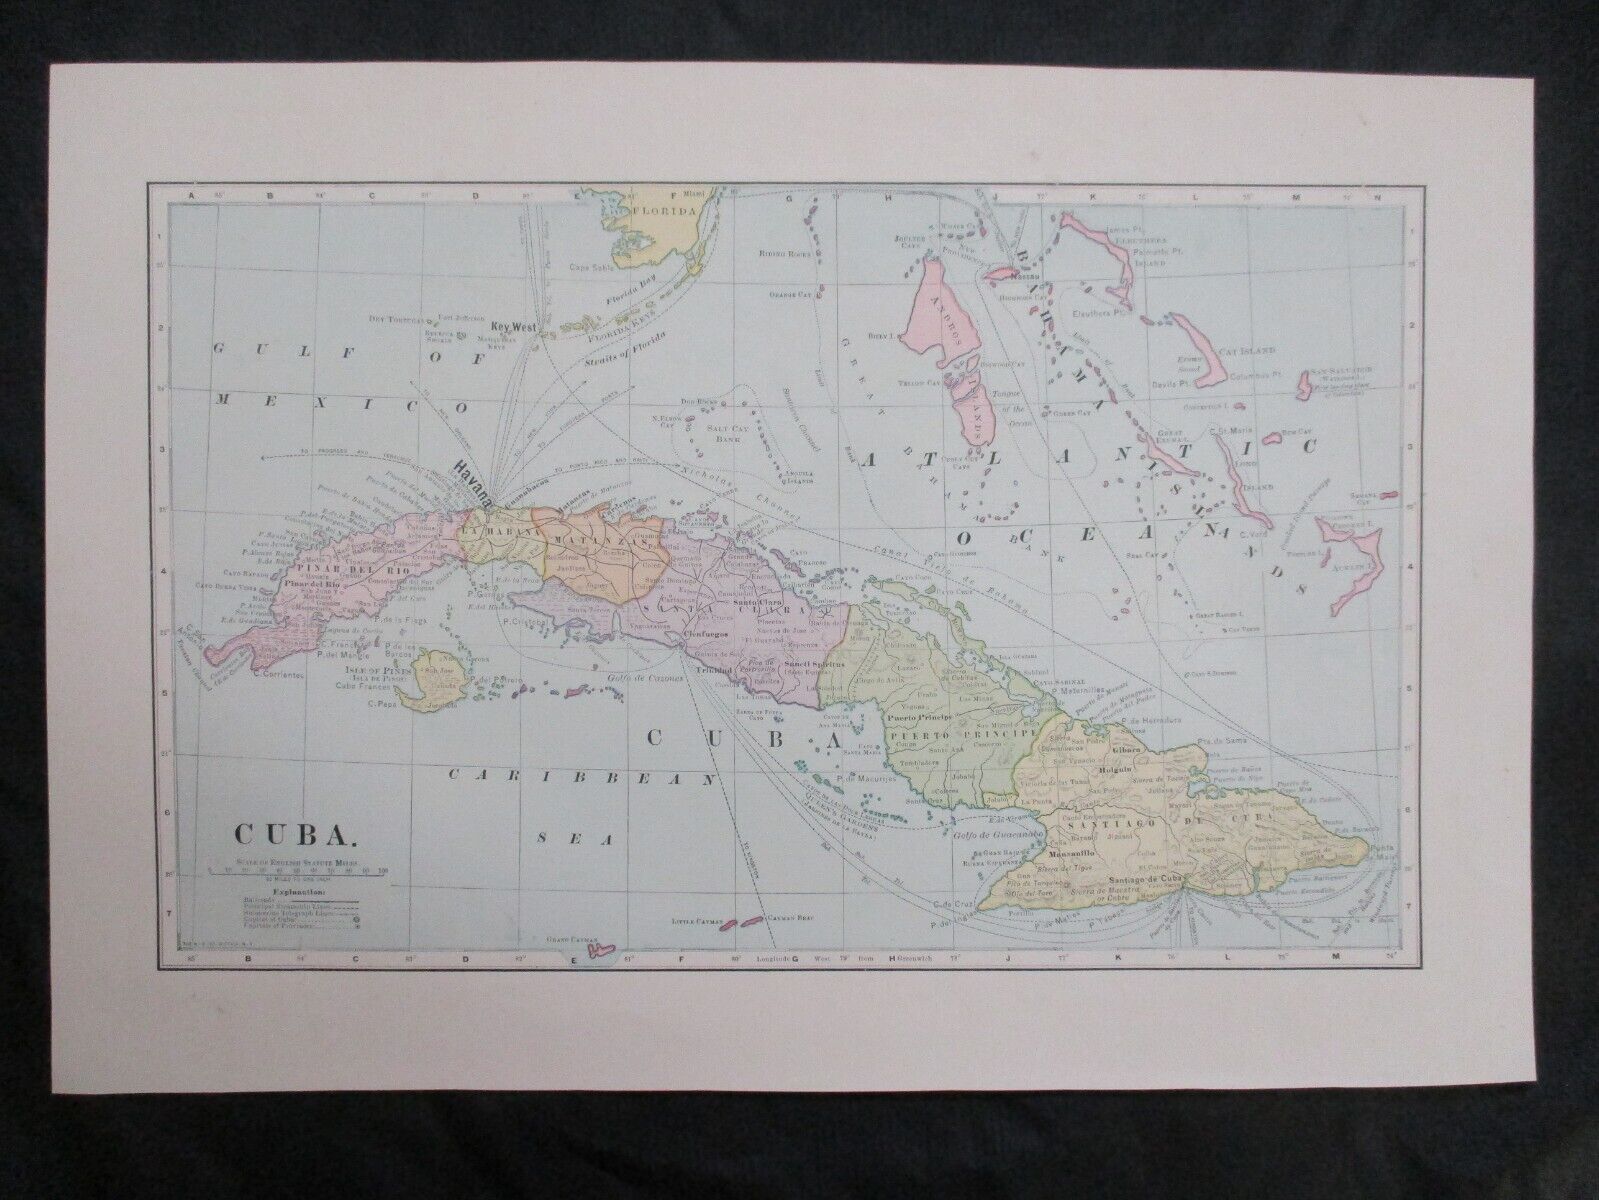 1899 Cuba Lithograph Map Print - I HAVE OTHER CUBA MAPS - I COMBINE SHIPPING